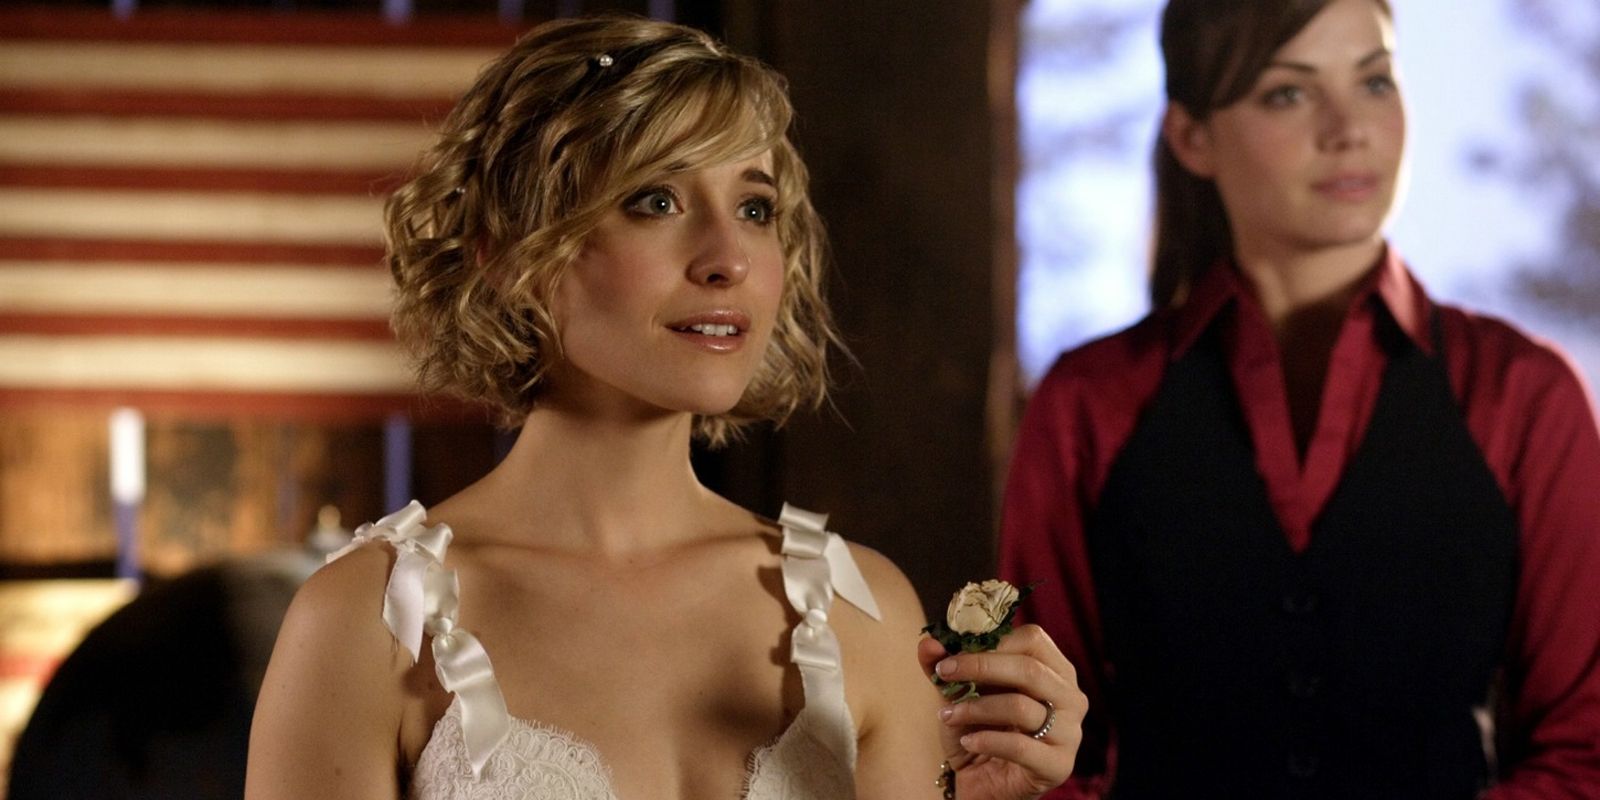 Allison Mack and Erica Durance in Smallville